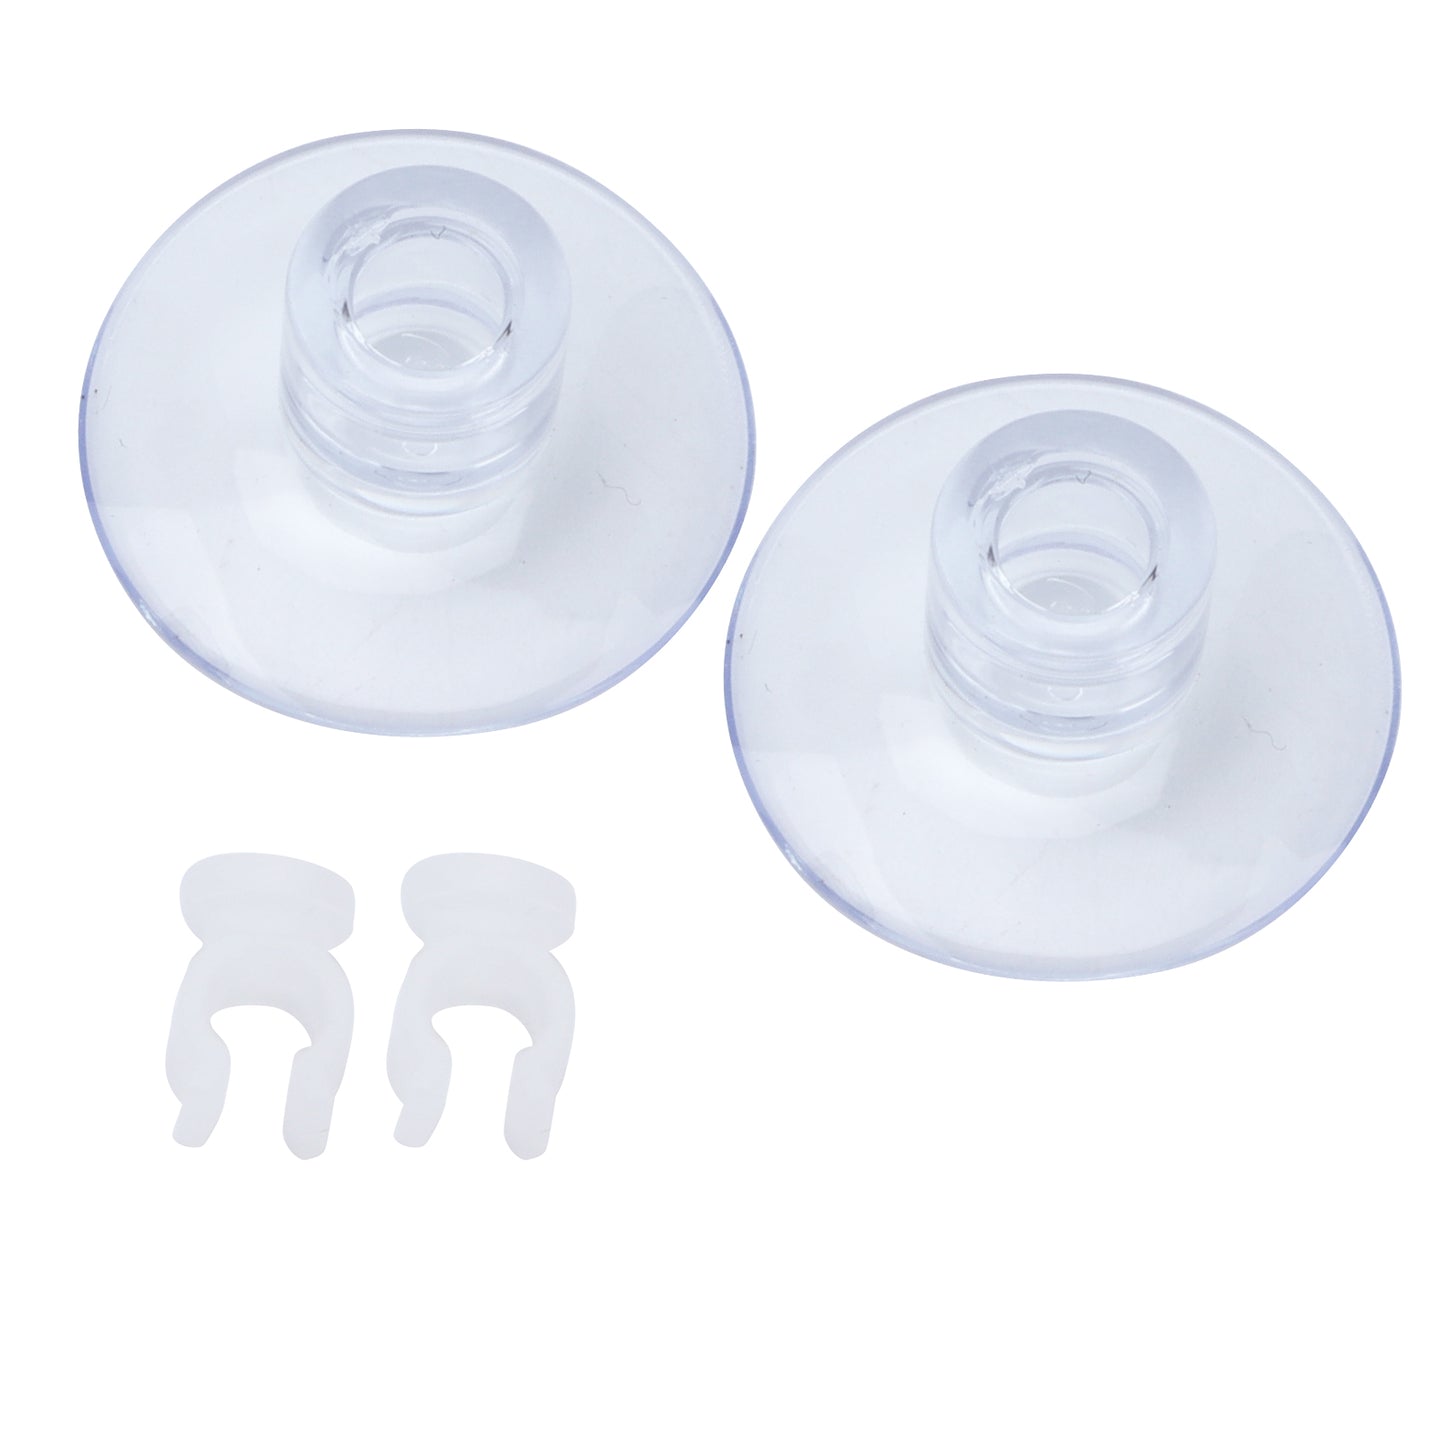 Suction cup - 10 pack